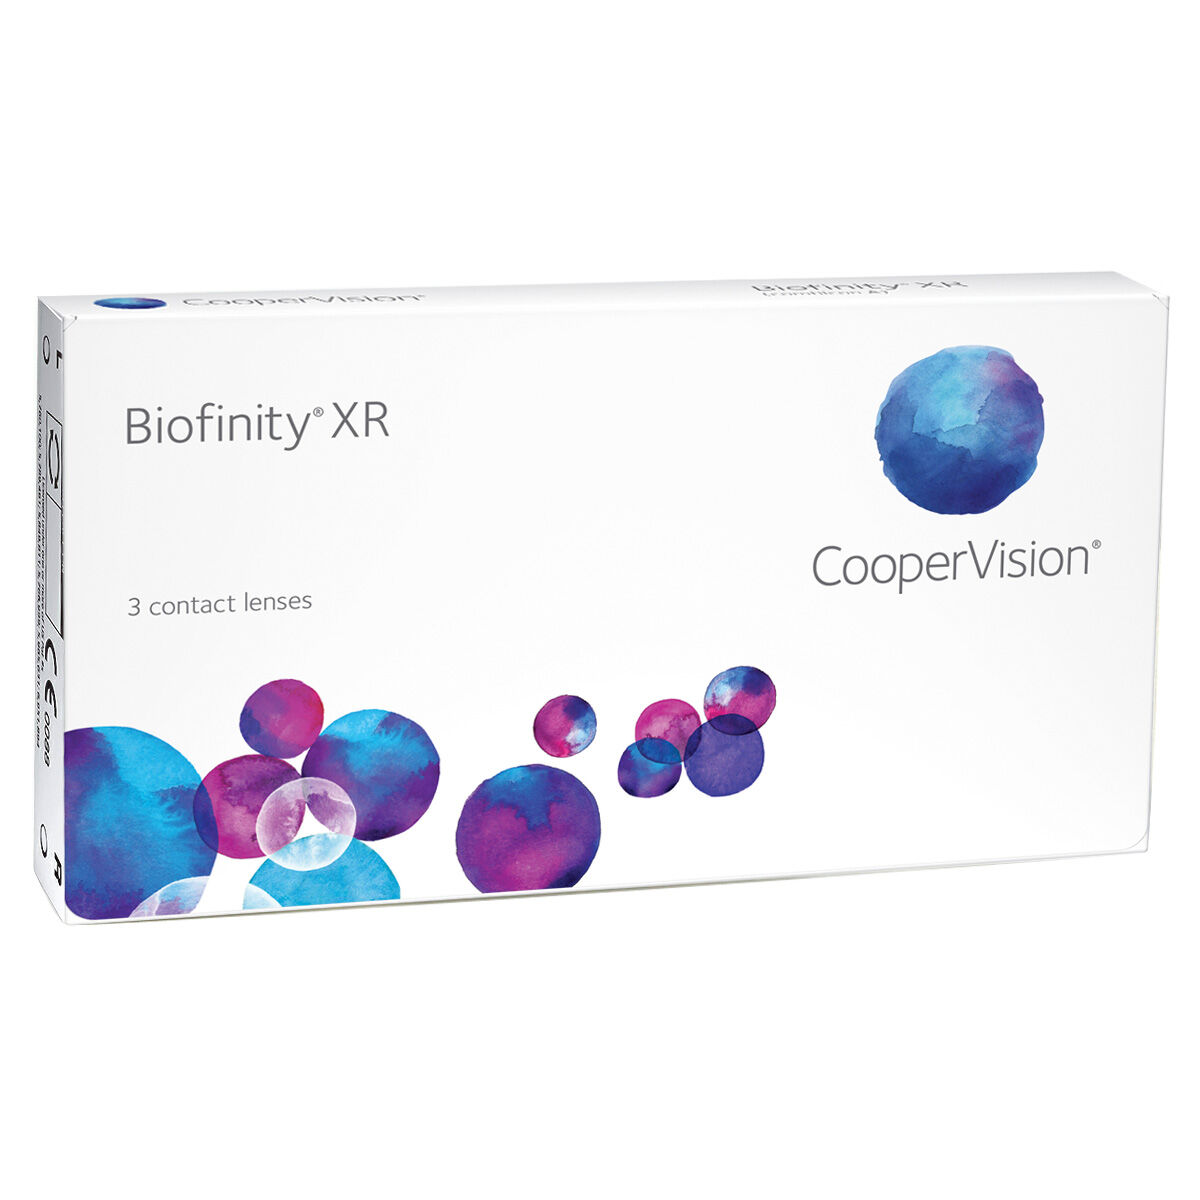 CooperVision Biofinity XR (3 Contact Lenses), CooperVision, Monthly Lenses, Comfilcon A